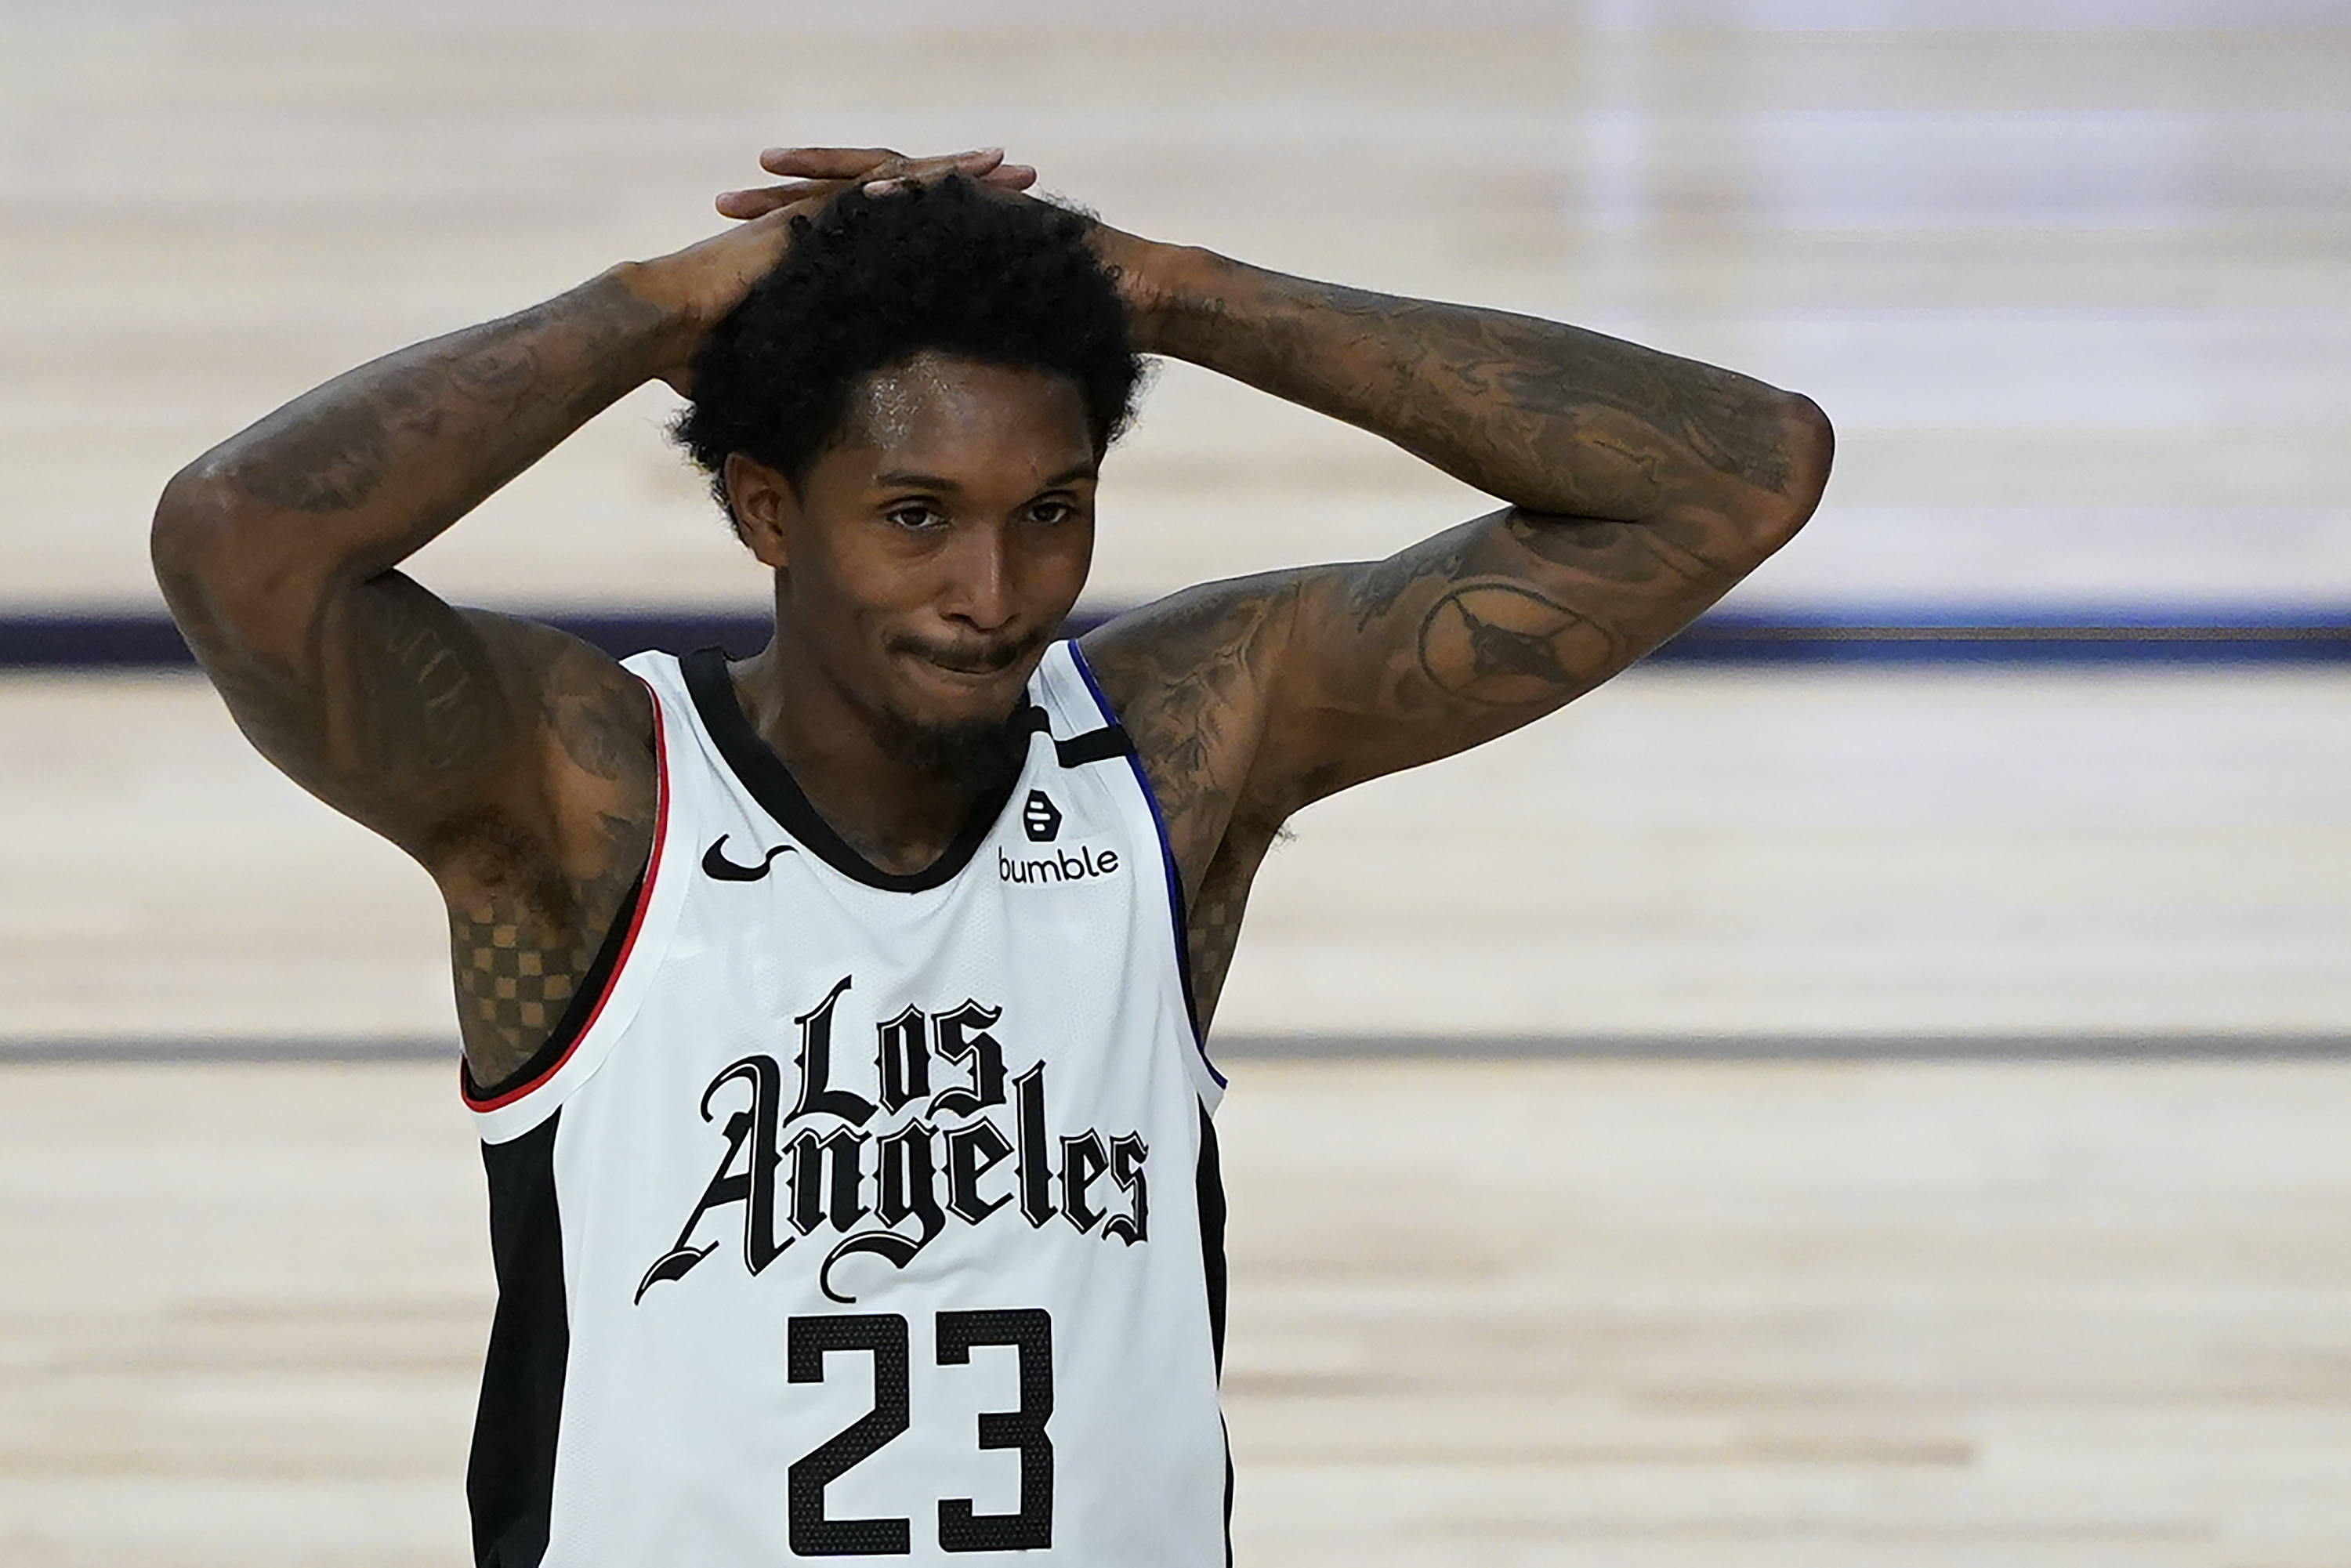 Clippers Player Lou Williams Made 1 Simple Change That Saved Him Thousands of Dollars